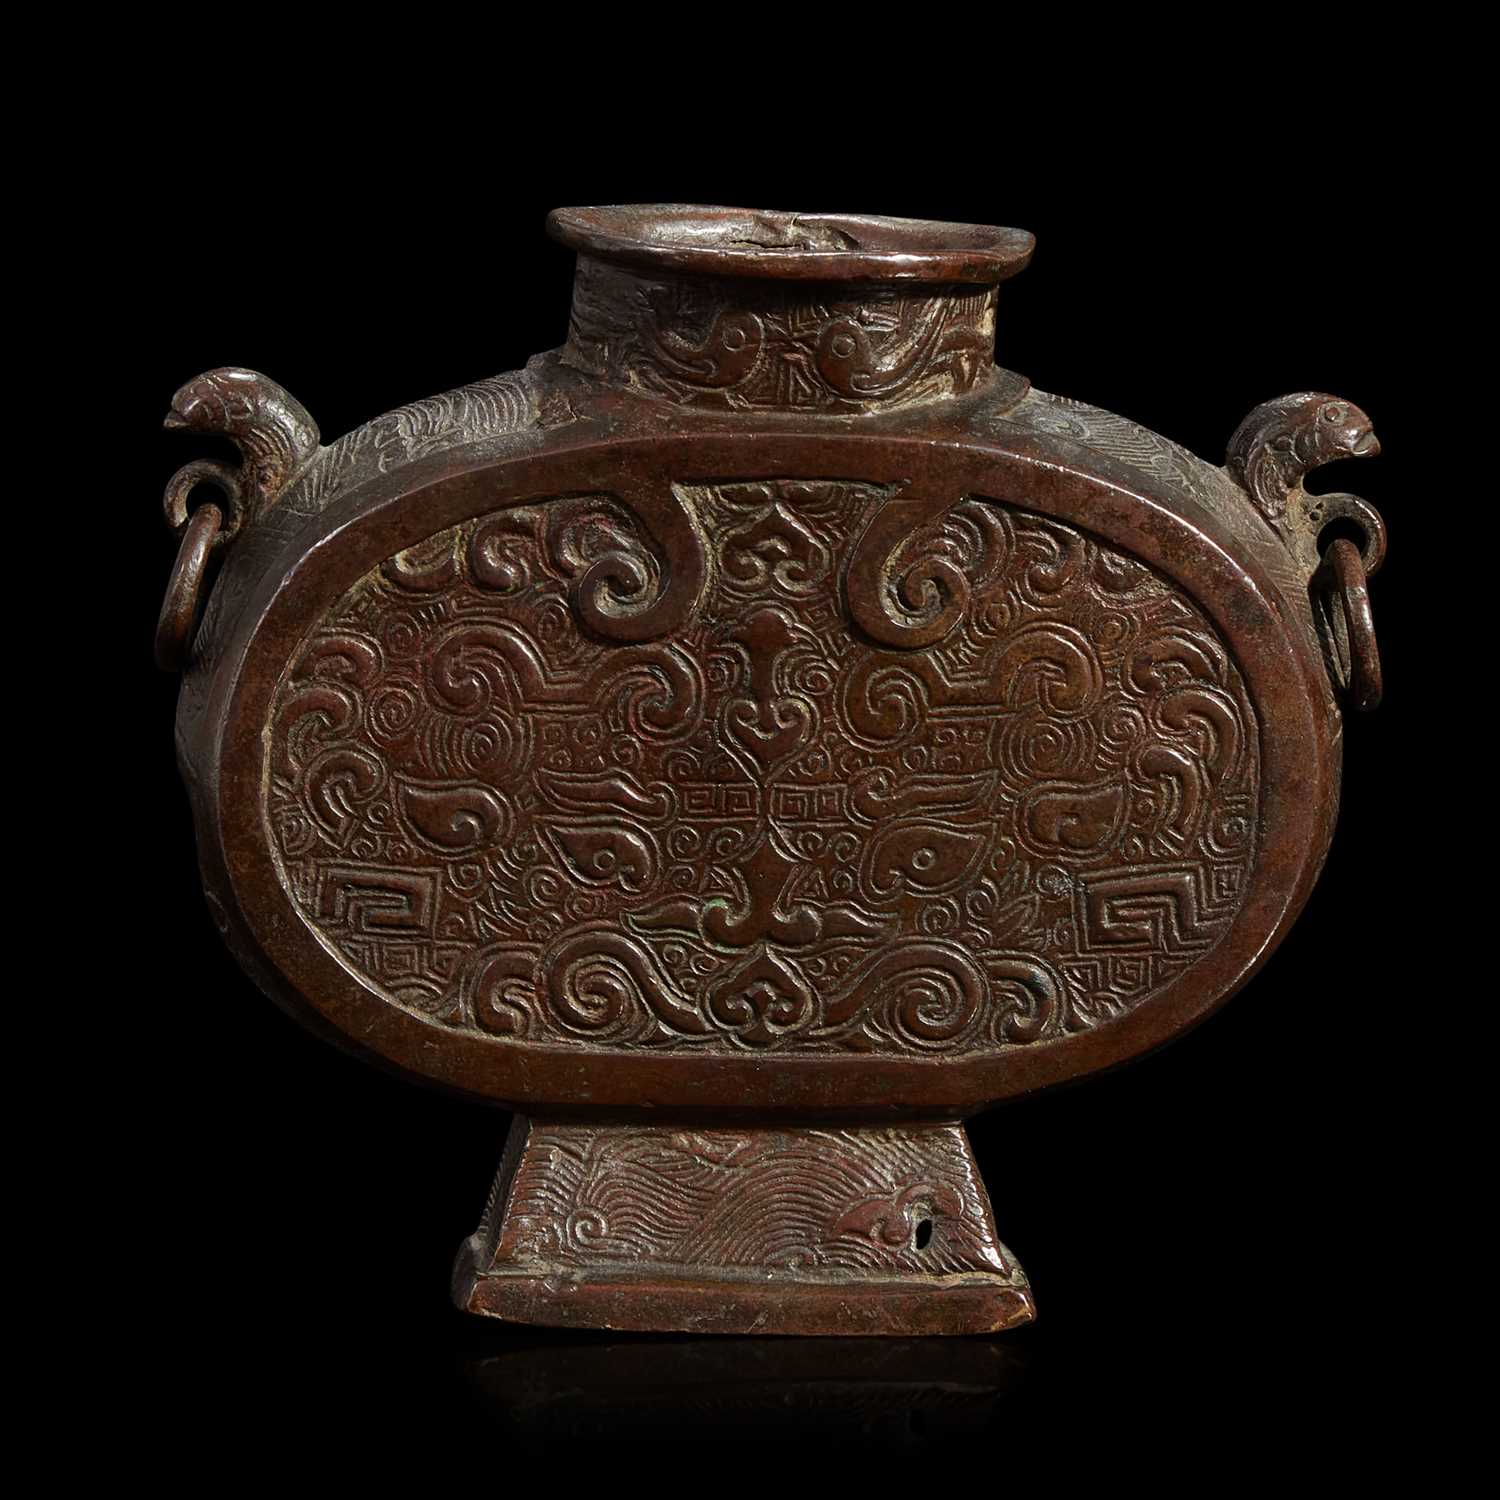 Lot 124 - A Chinese patinated bronze archaistic vessel, "Bianhu"